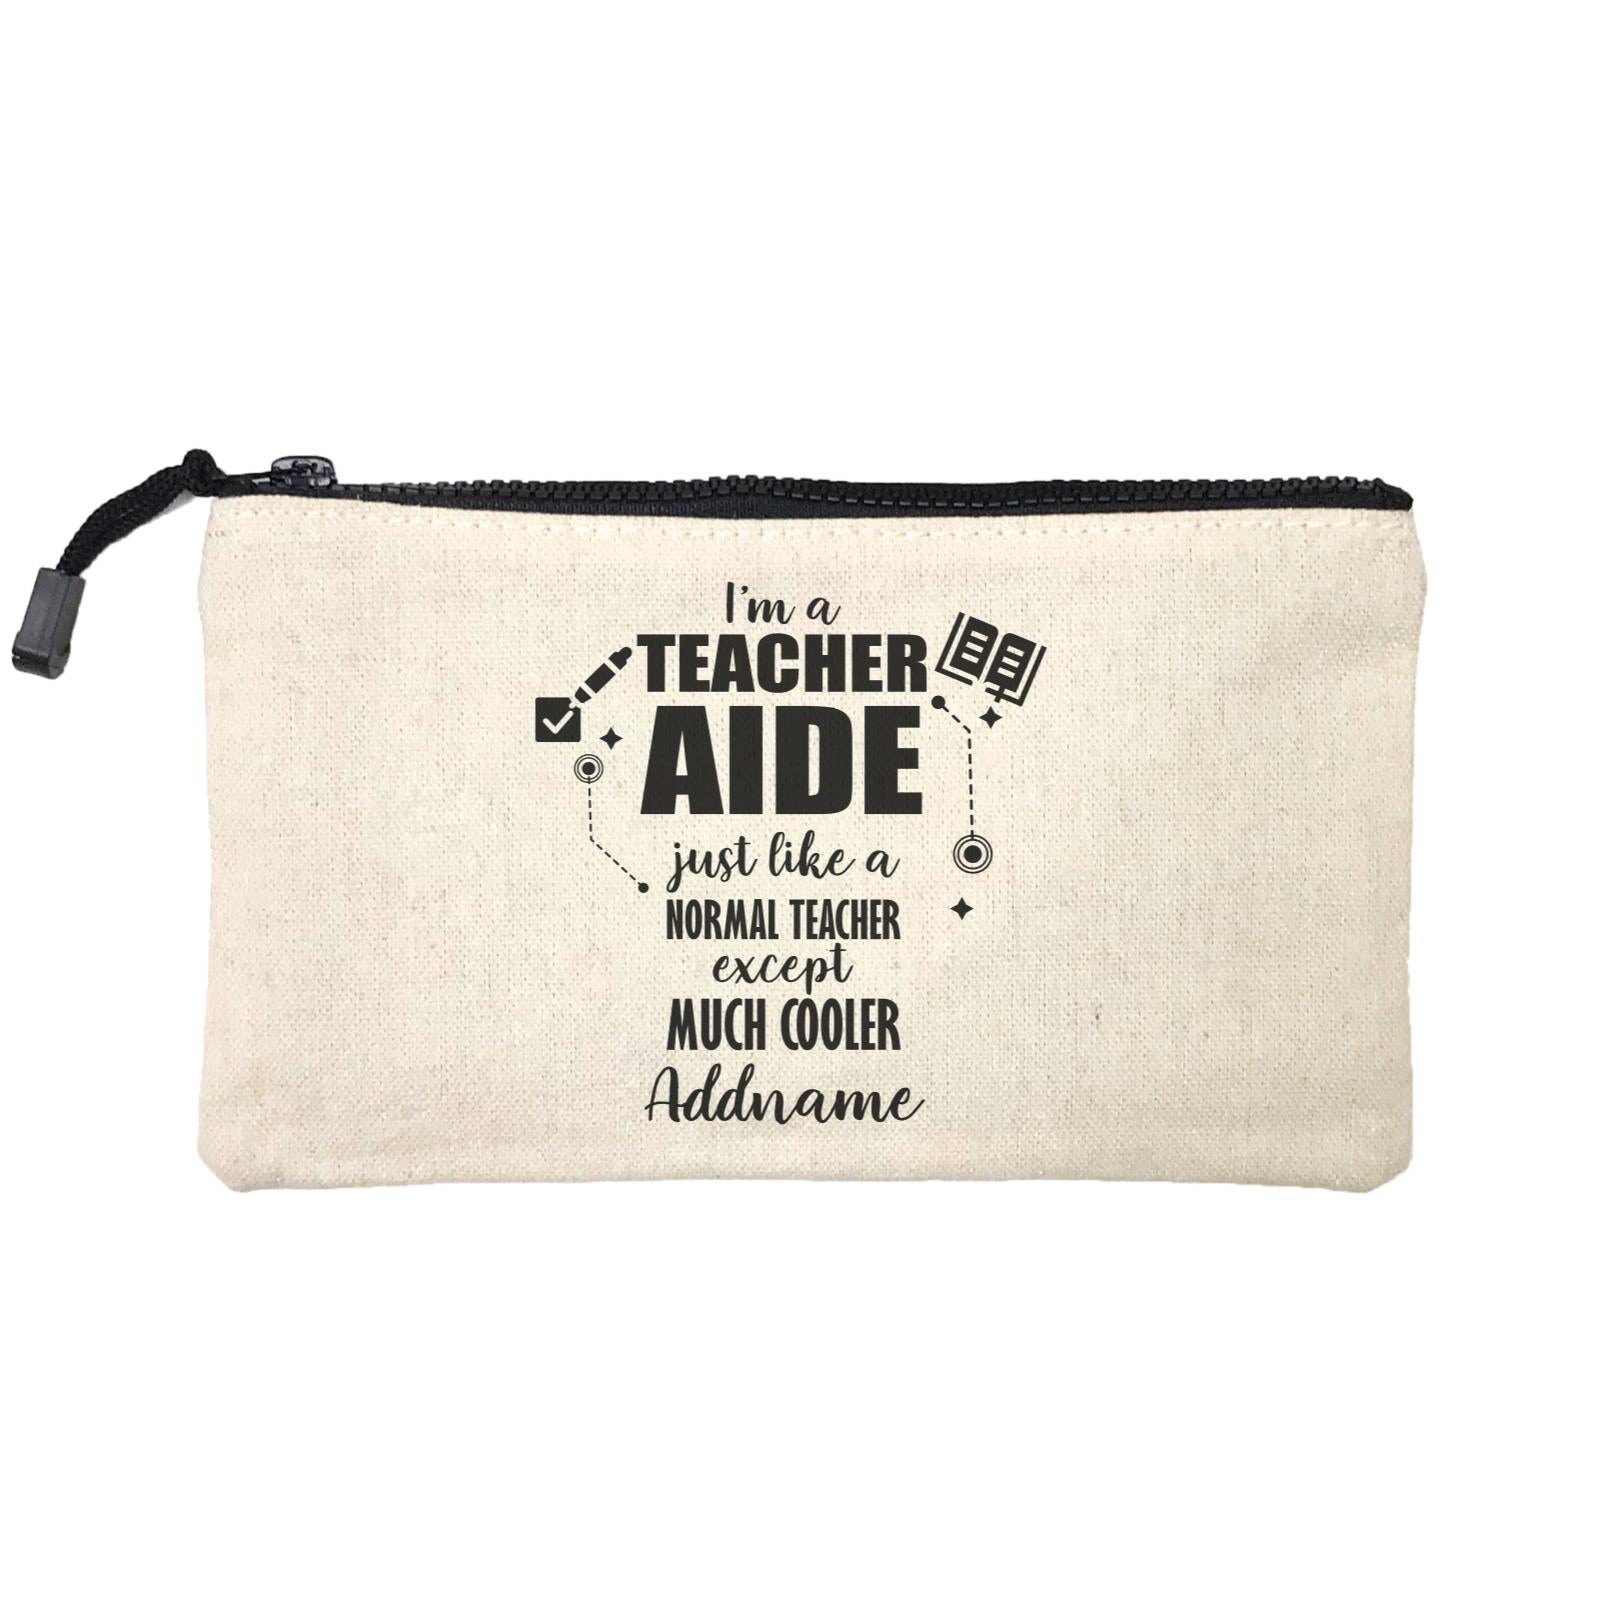 Subject Teachers I'm A Teacher Aide Addname Mini Accessories Stationery Pouch